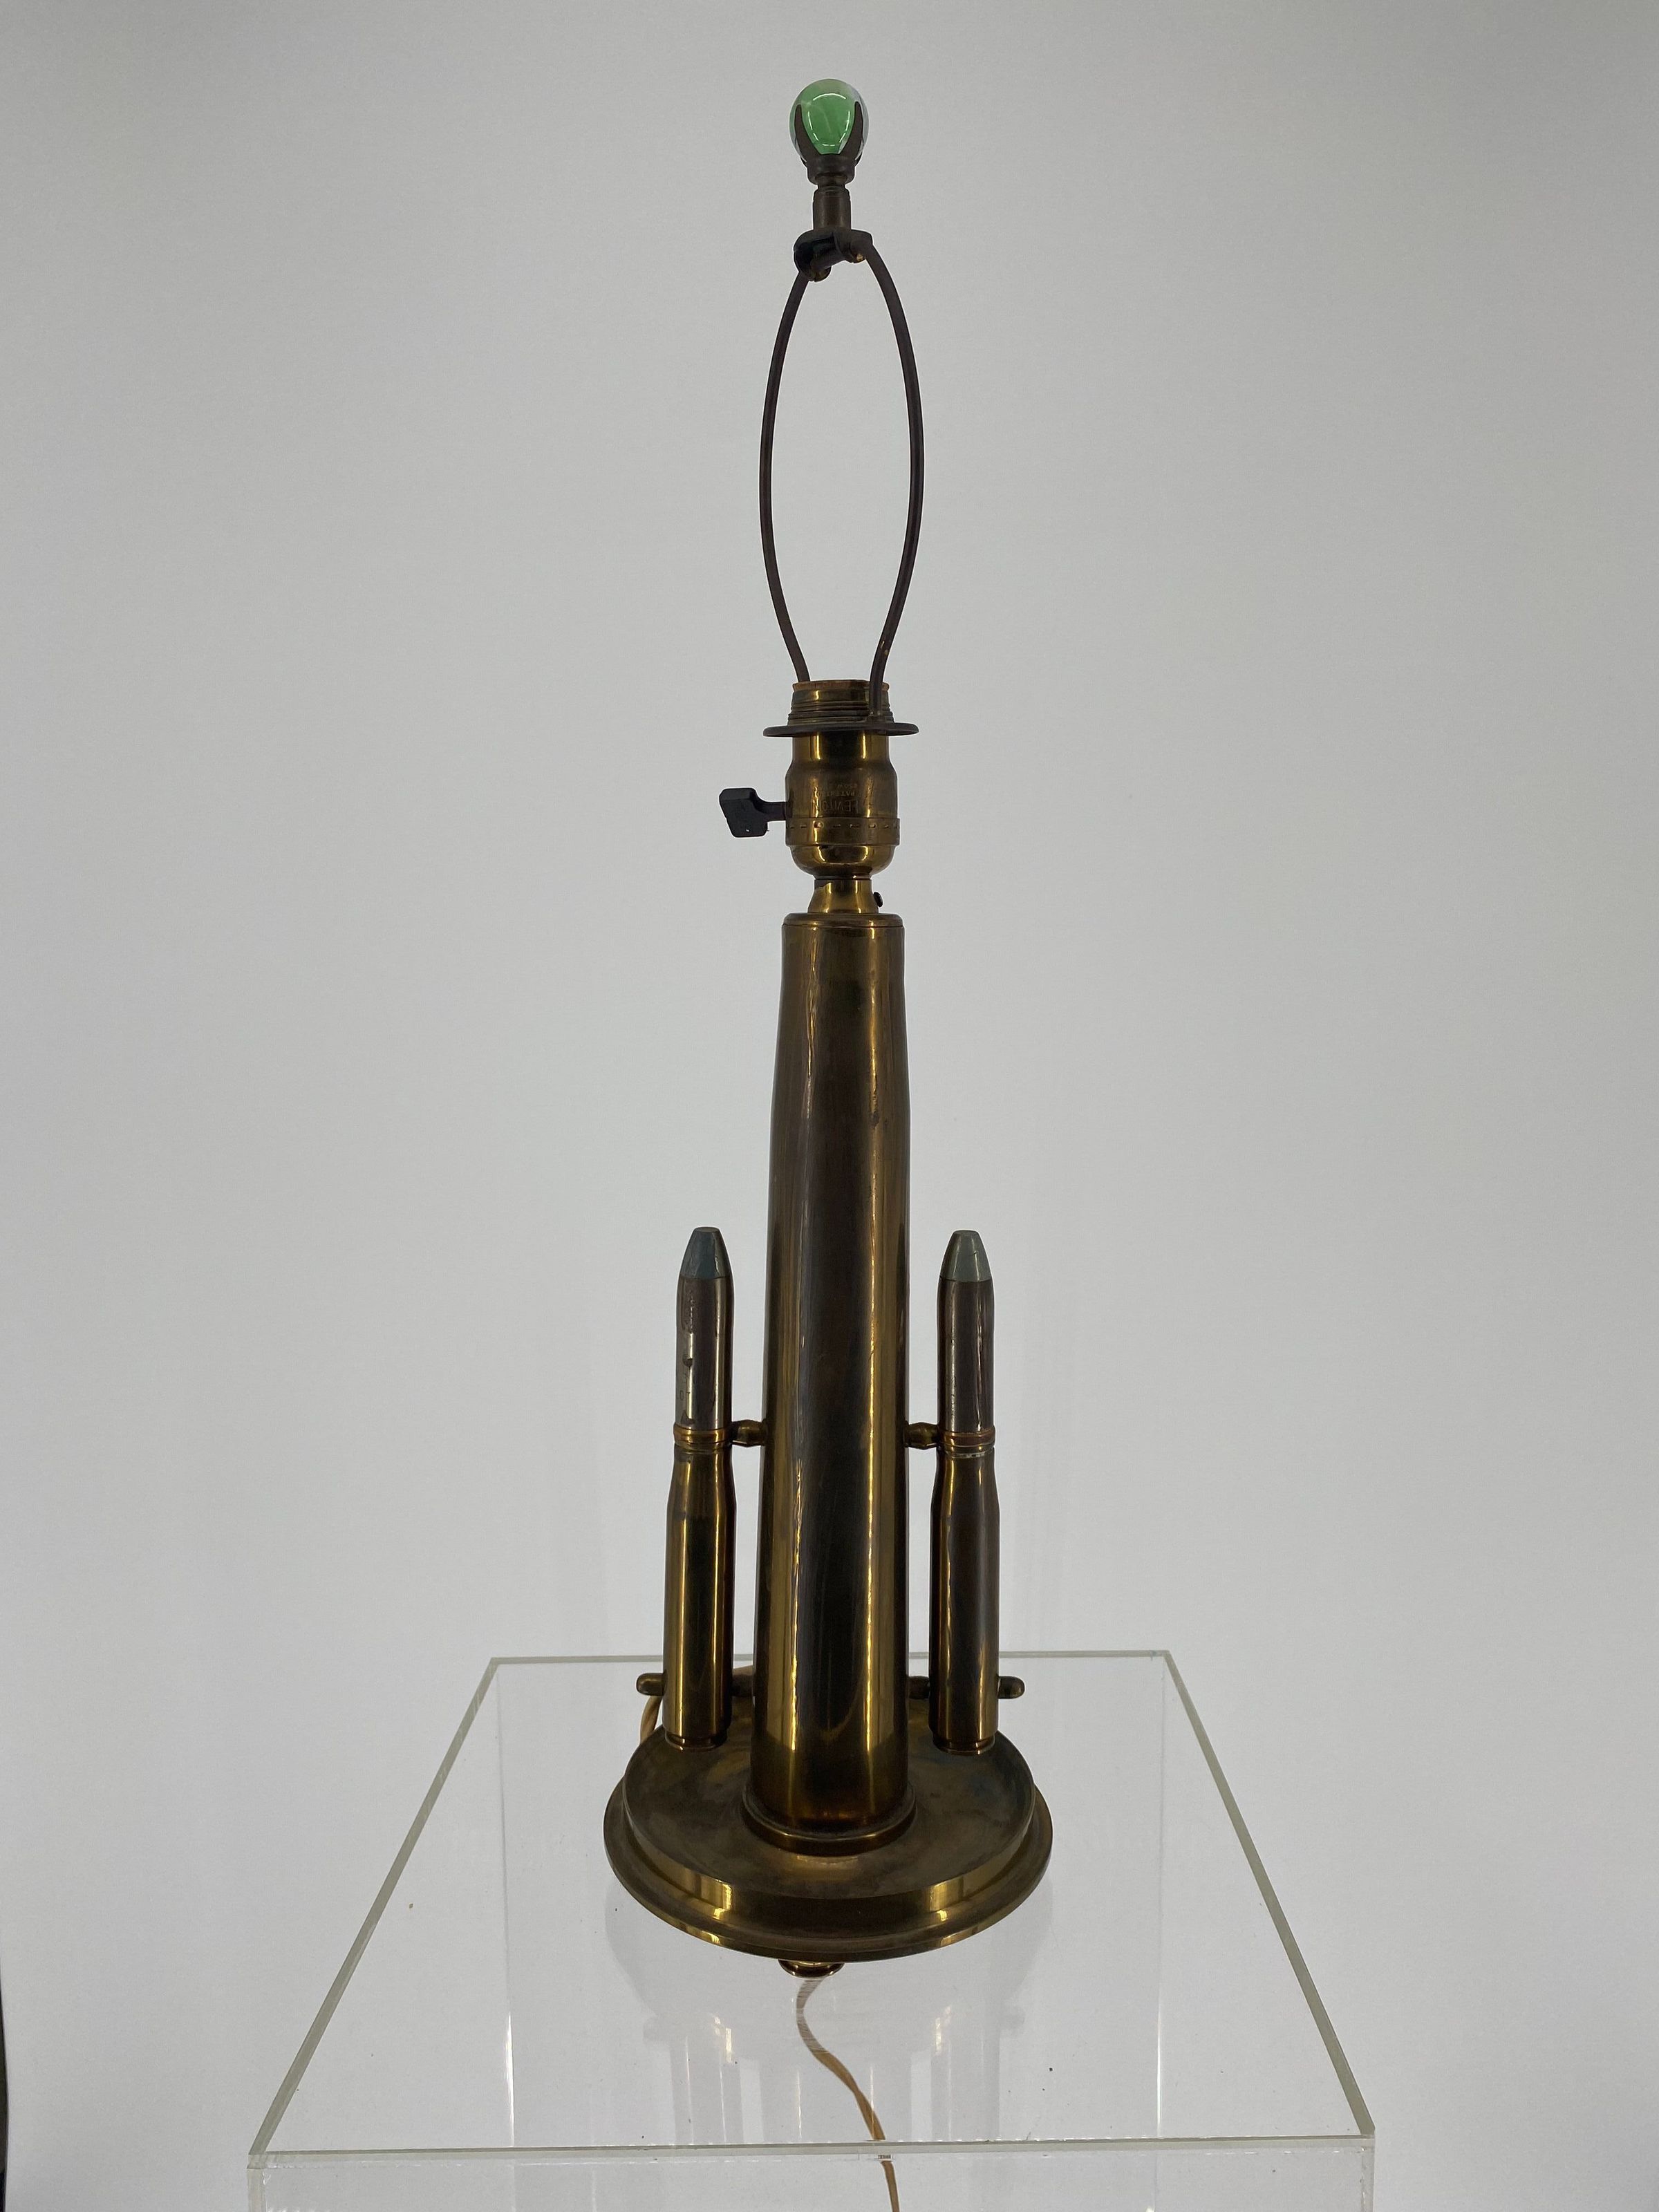 Primary Image of Shell Casing Lamp